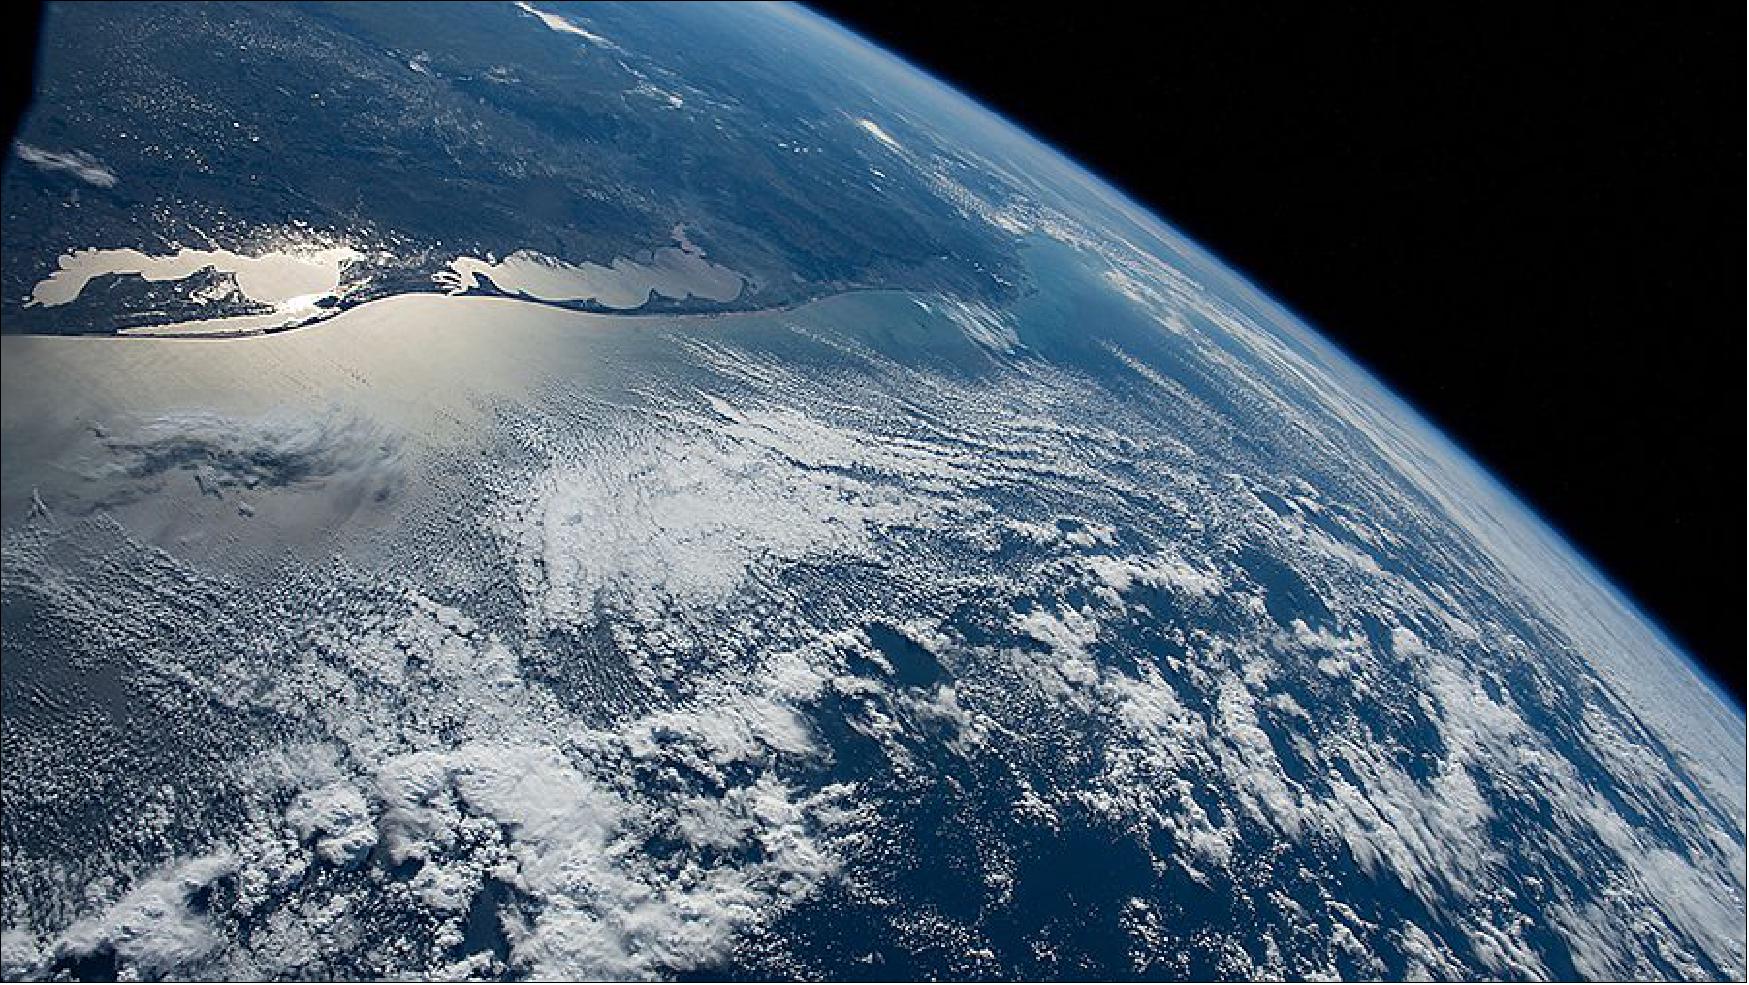 Figure 8: The southern tip of Brazil (upper left) bordering Uruguay was pictured as the International Space Station orbited off the Atlantic coast of South America (image credit: NASA)